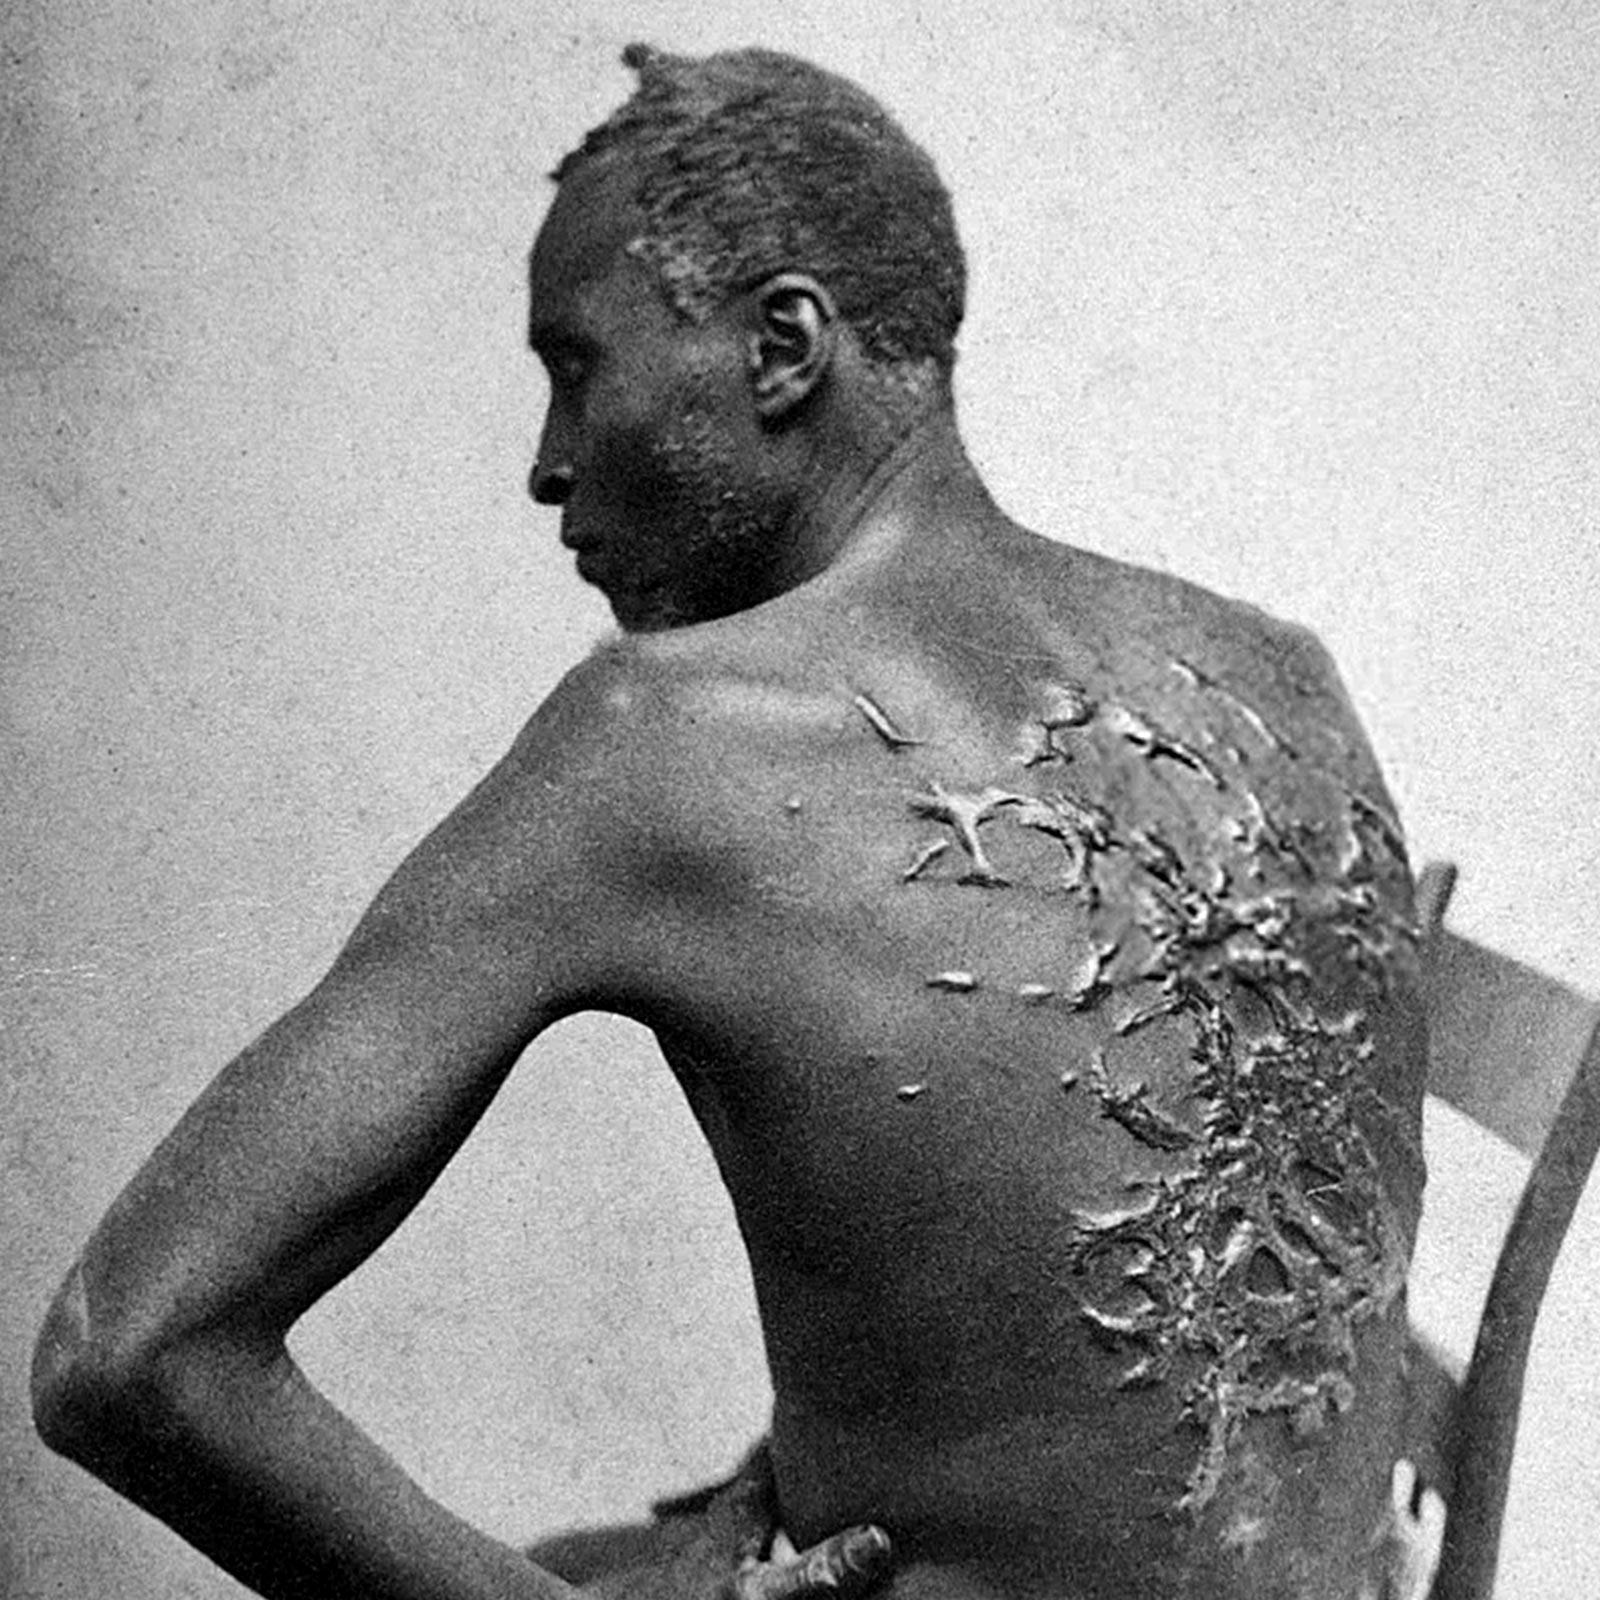 Photograph shows a mass of raised scars on the back of Private Gordon, an enslaved man, left by brutal whippings.